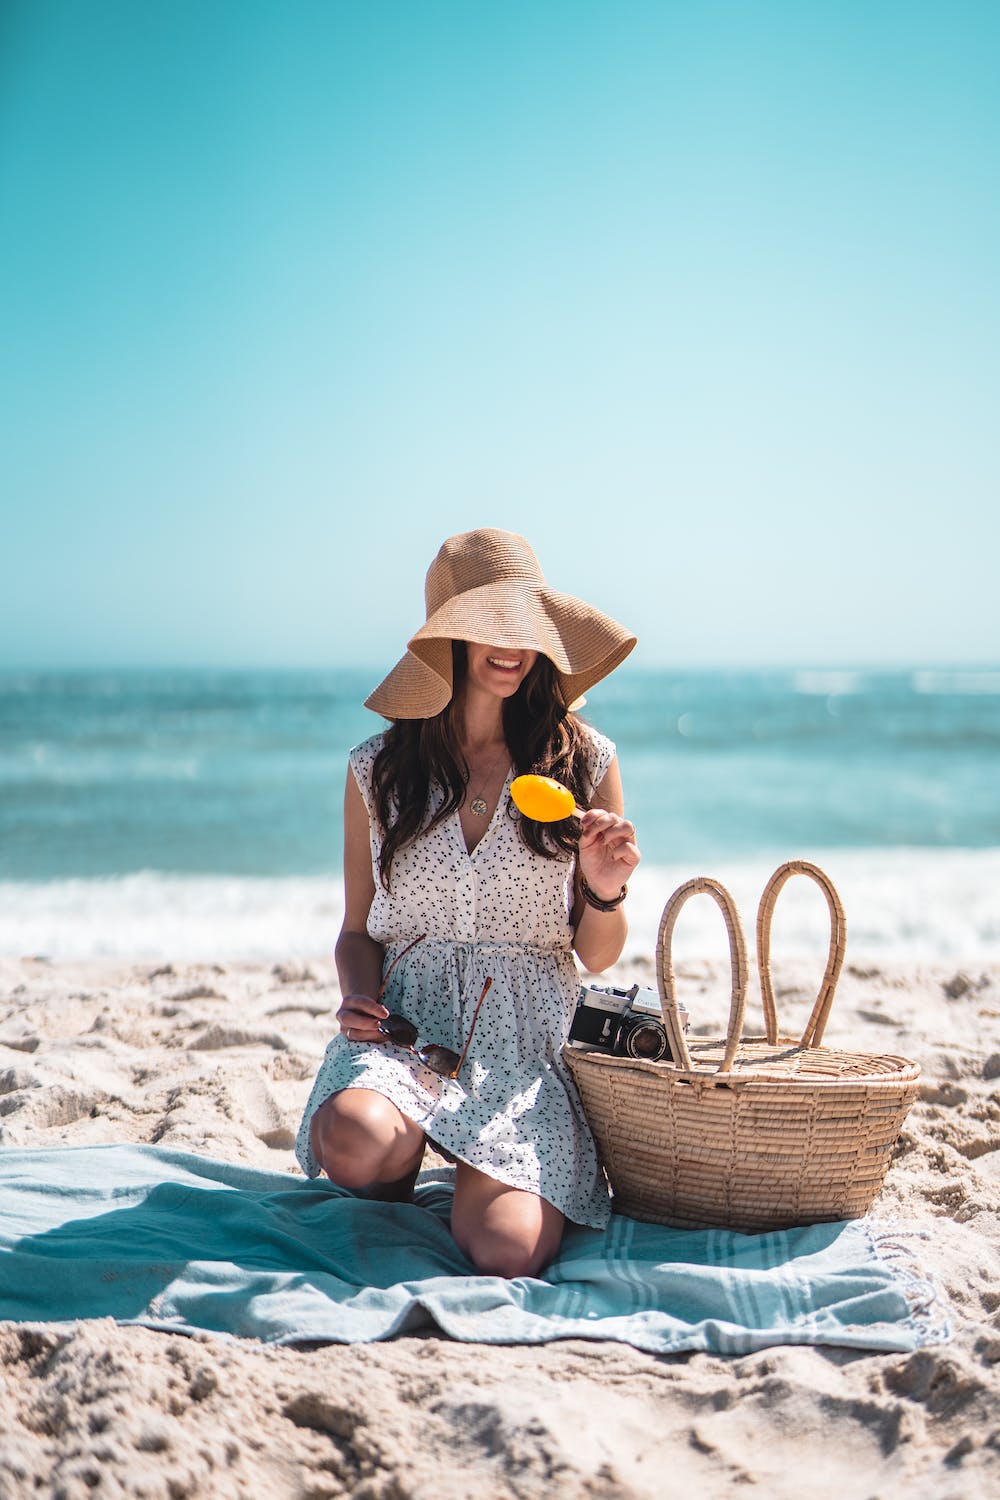 WOMAN SAT ON THE BEACH IN A HAT AND DRESS